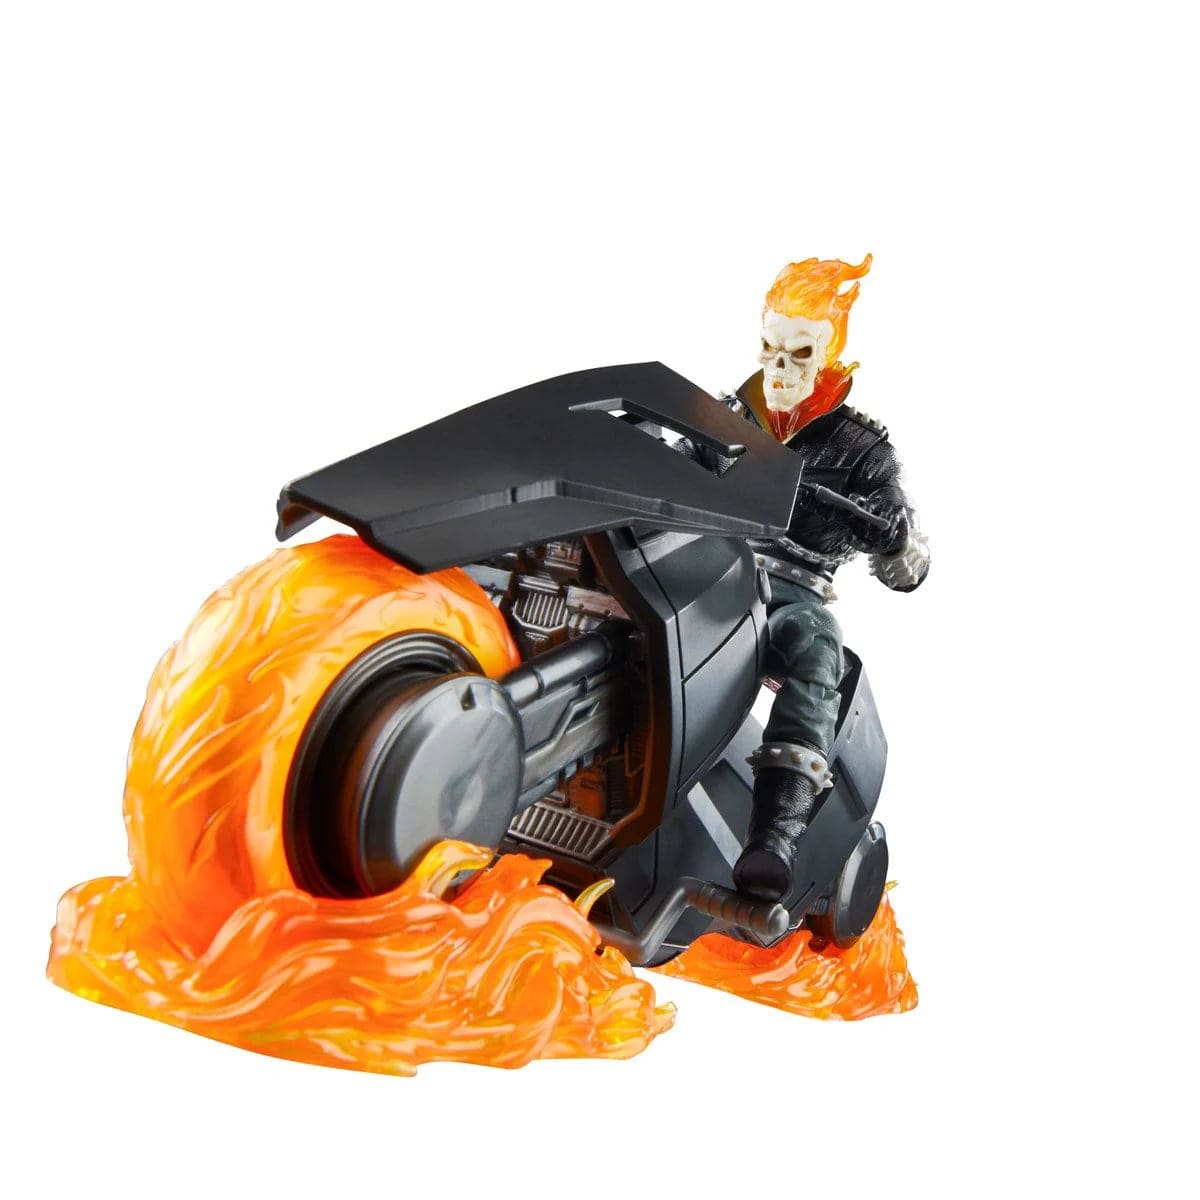 Marvel-Legends-Series-Ghost-Rider-_Danny-Ketch_-with-Motorcycle-Action-Figure-Pose-Bike-Forward